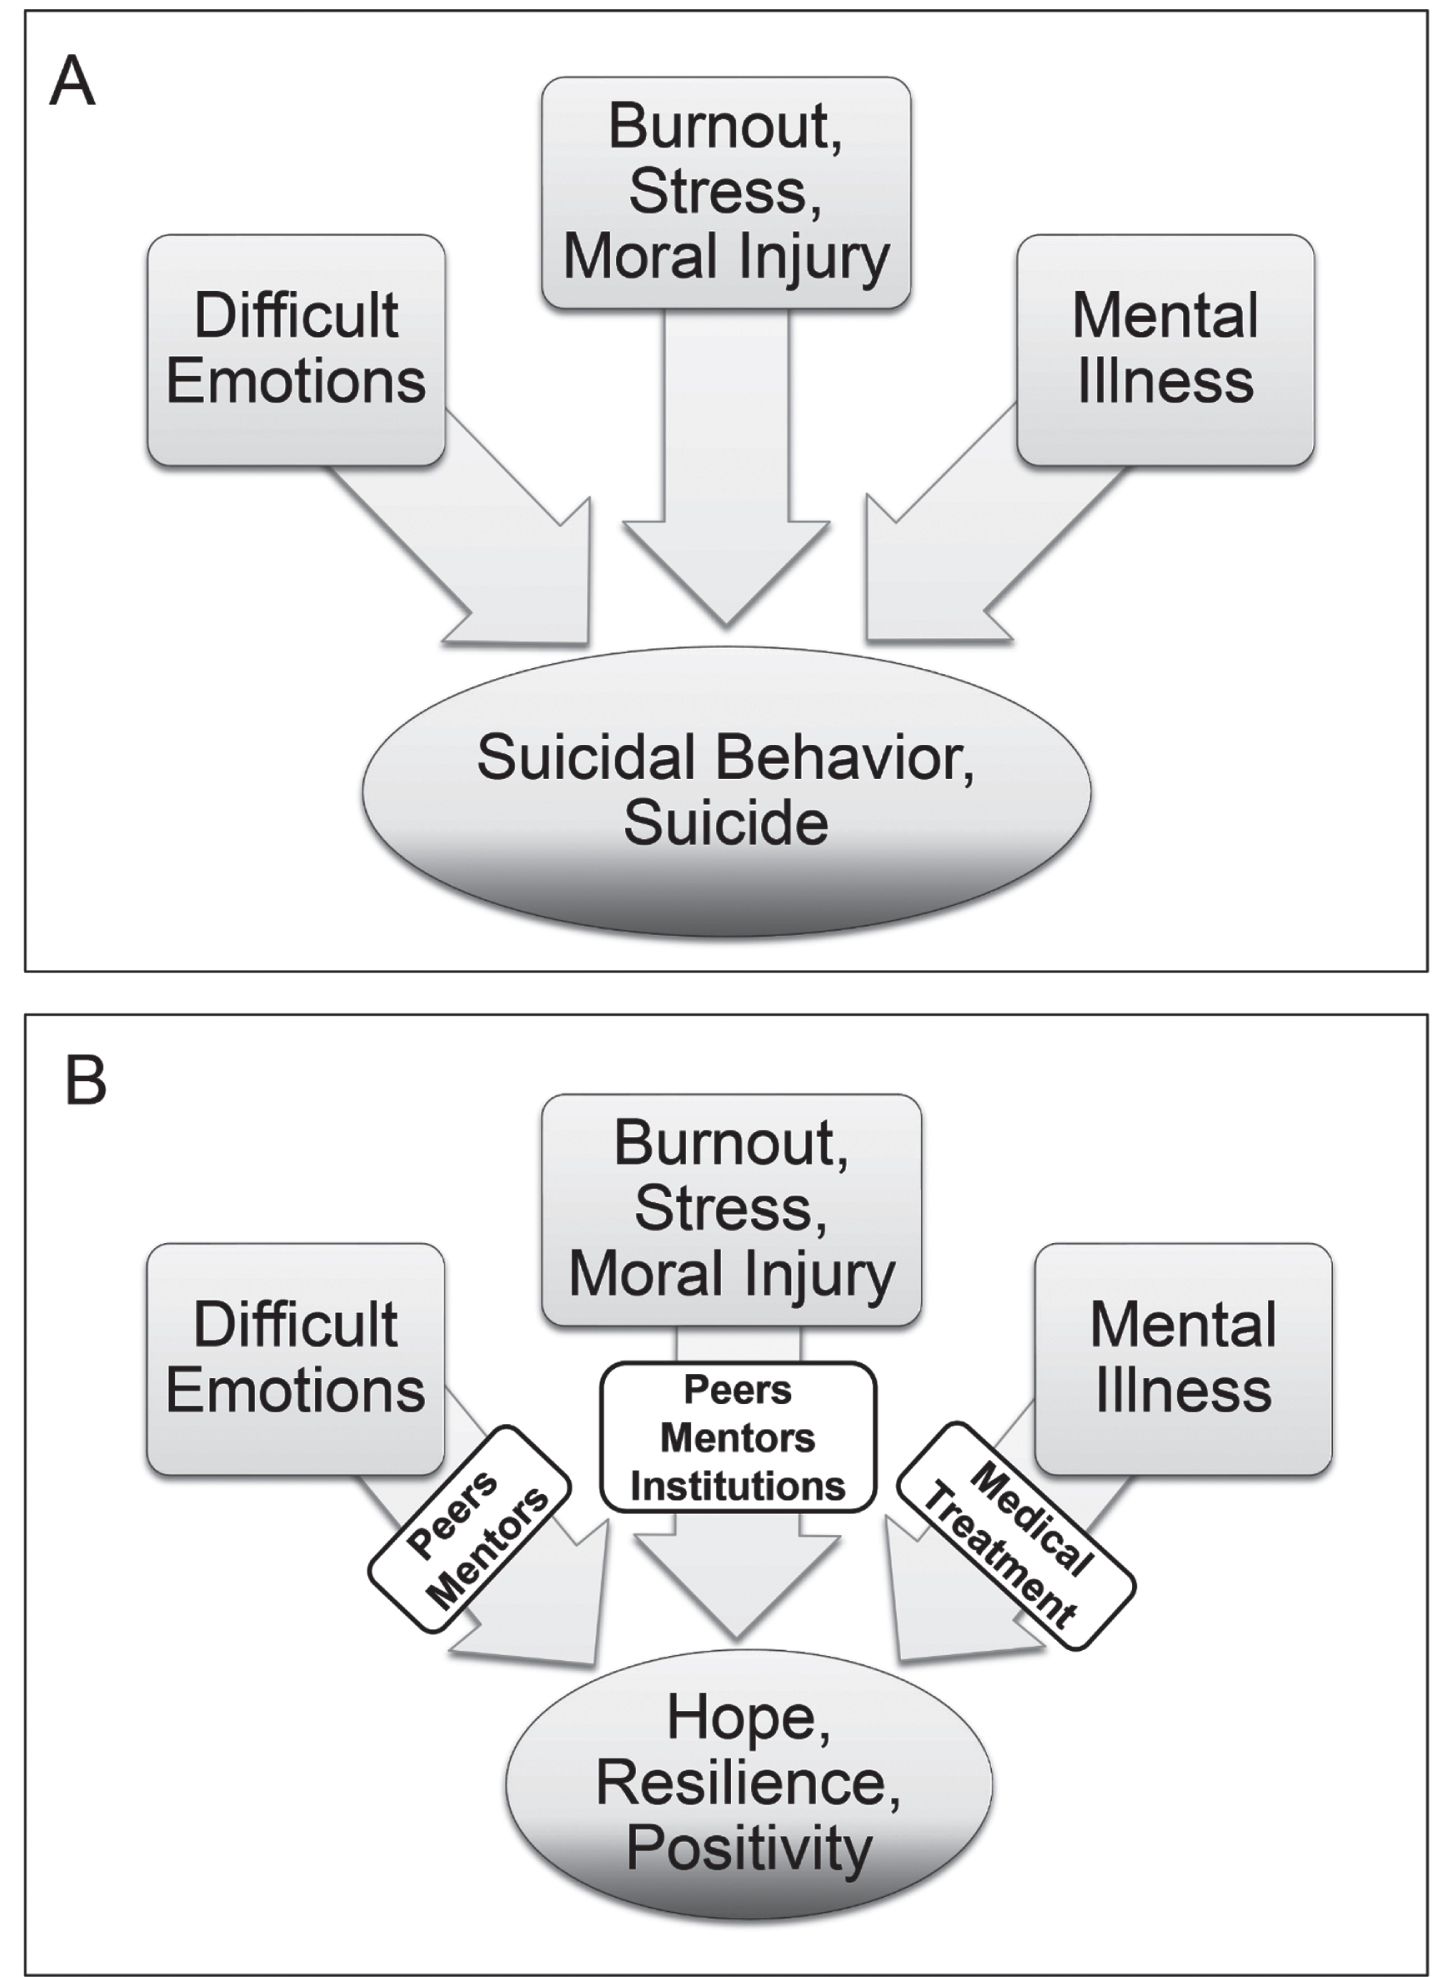 In physician training, modifiable factors of difficult emotional situations, burnout, chronic stress, moral injury, and mental illness affect wellness and can lead to suicidal behavior and suicide in the setting of acute stressors (A) When this occurs, peer support, mentorship, institutional support and resources, and when needed, medical treatment should be utilized to change the outcome (B) These modifiable factors do not resolve at end of physician training but remain throughout a physician’s career necessitating ongoing vigilance and support.